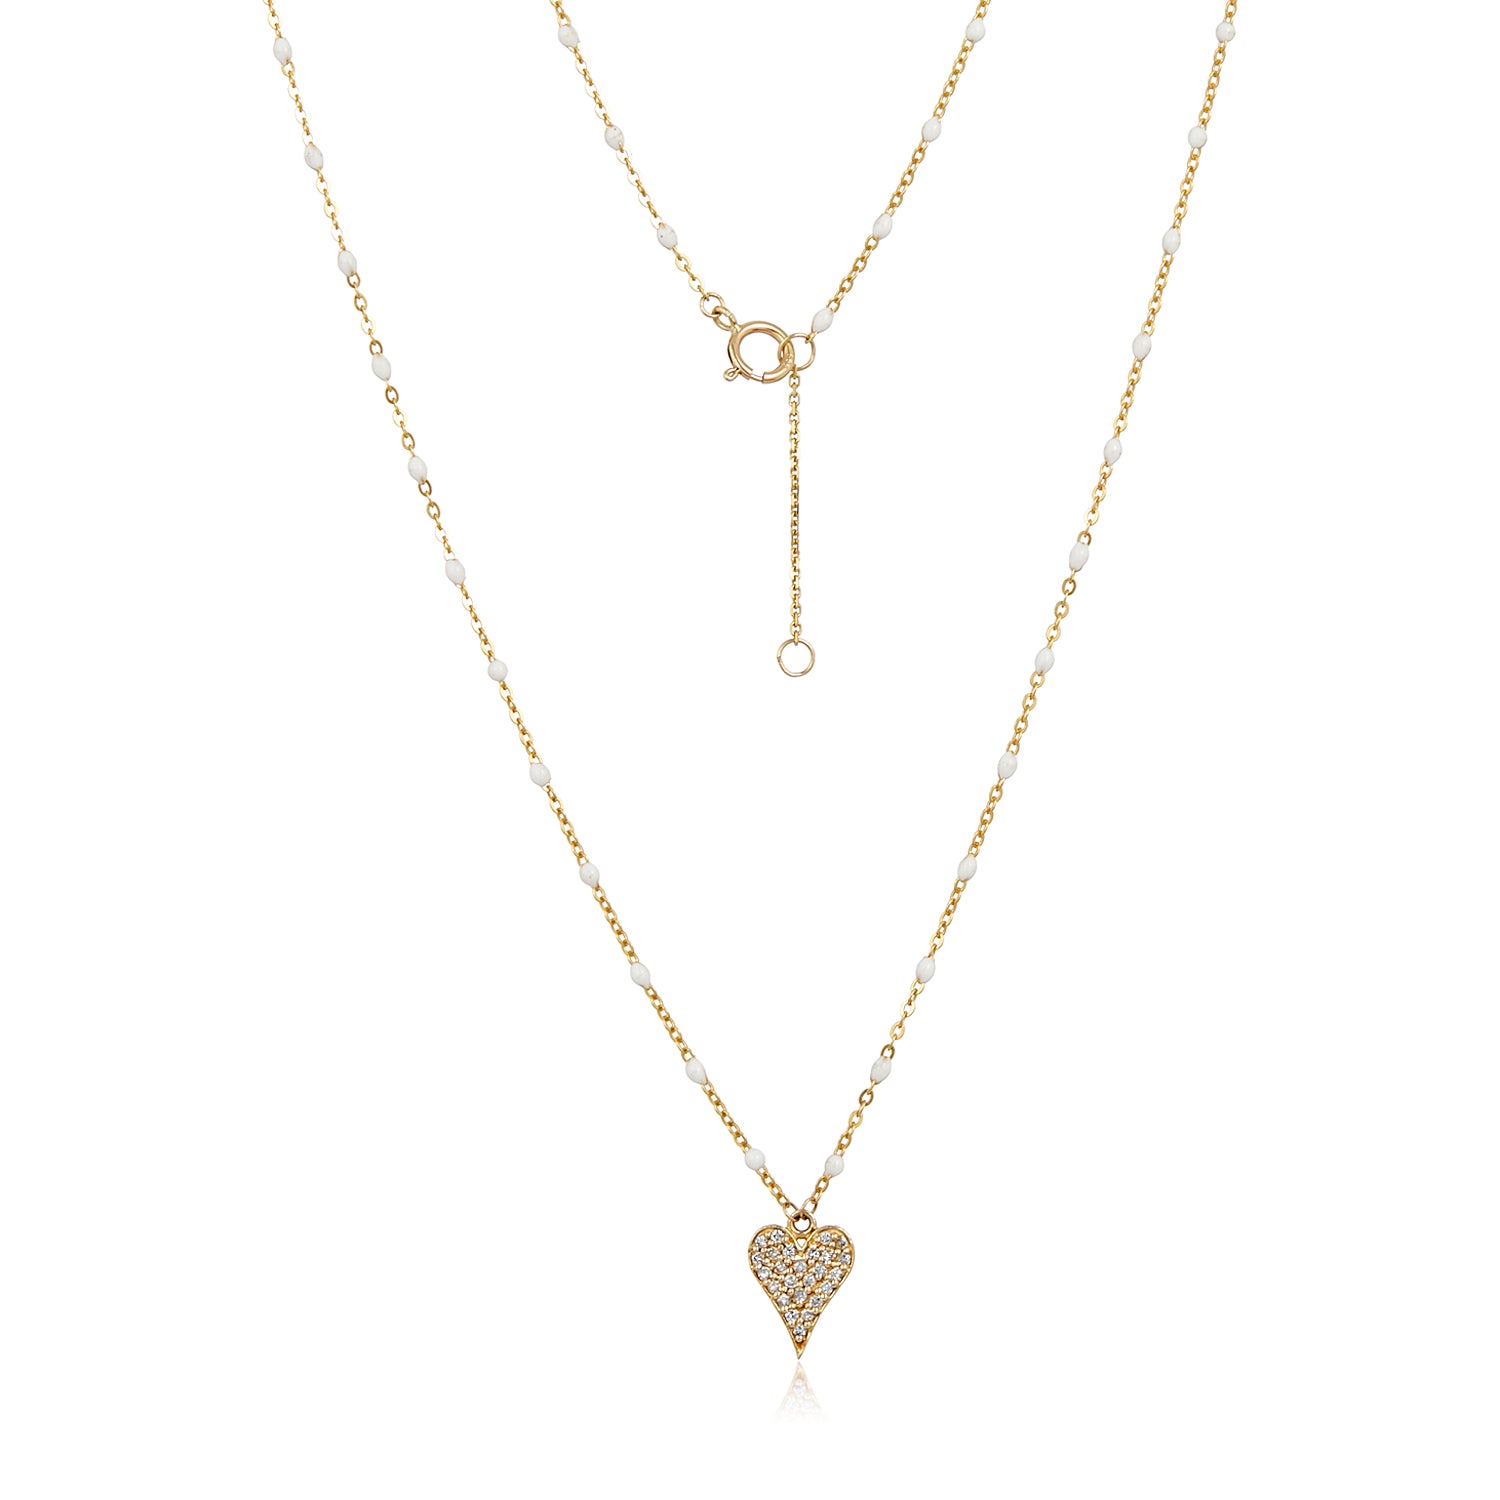 Pave Diamond Heart Charm Necklace in 14k